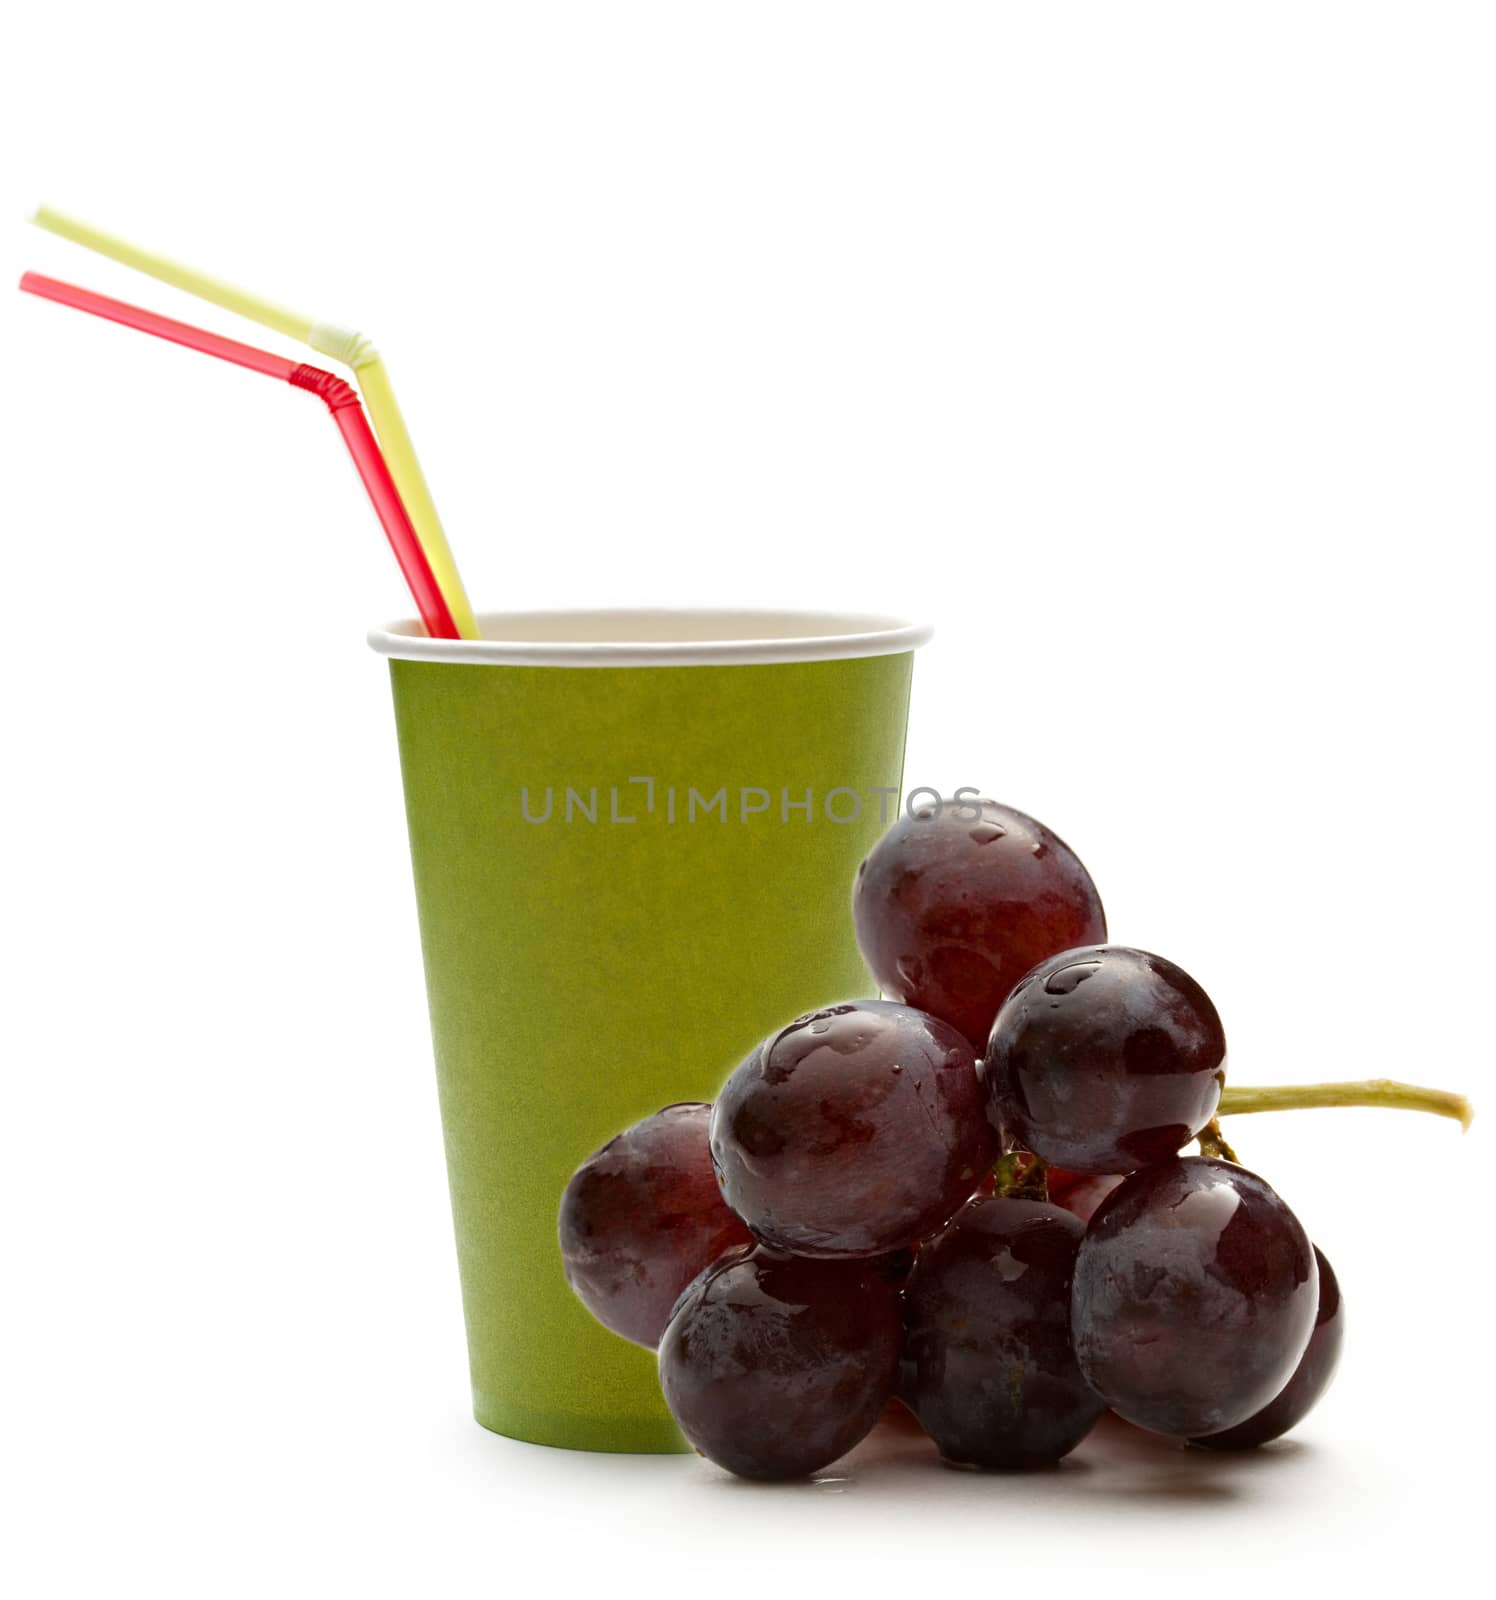 Paper cup with straws and grapes by Garsya